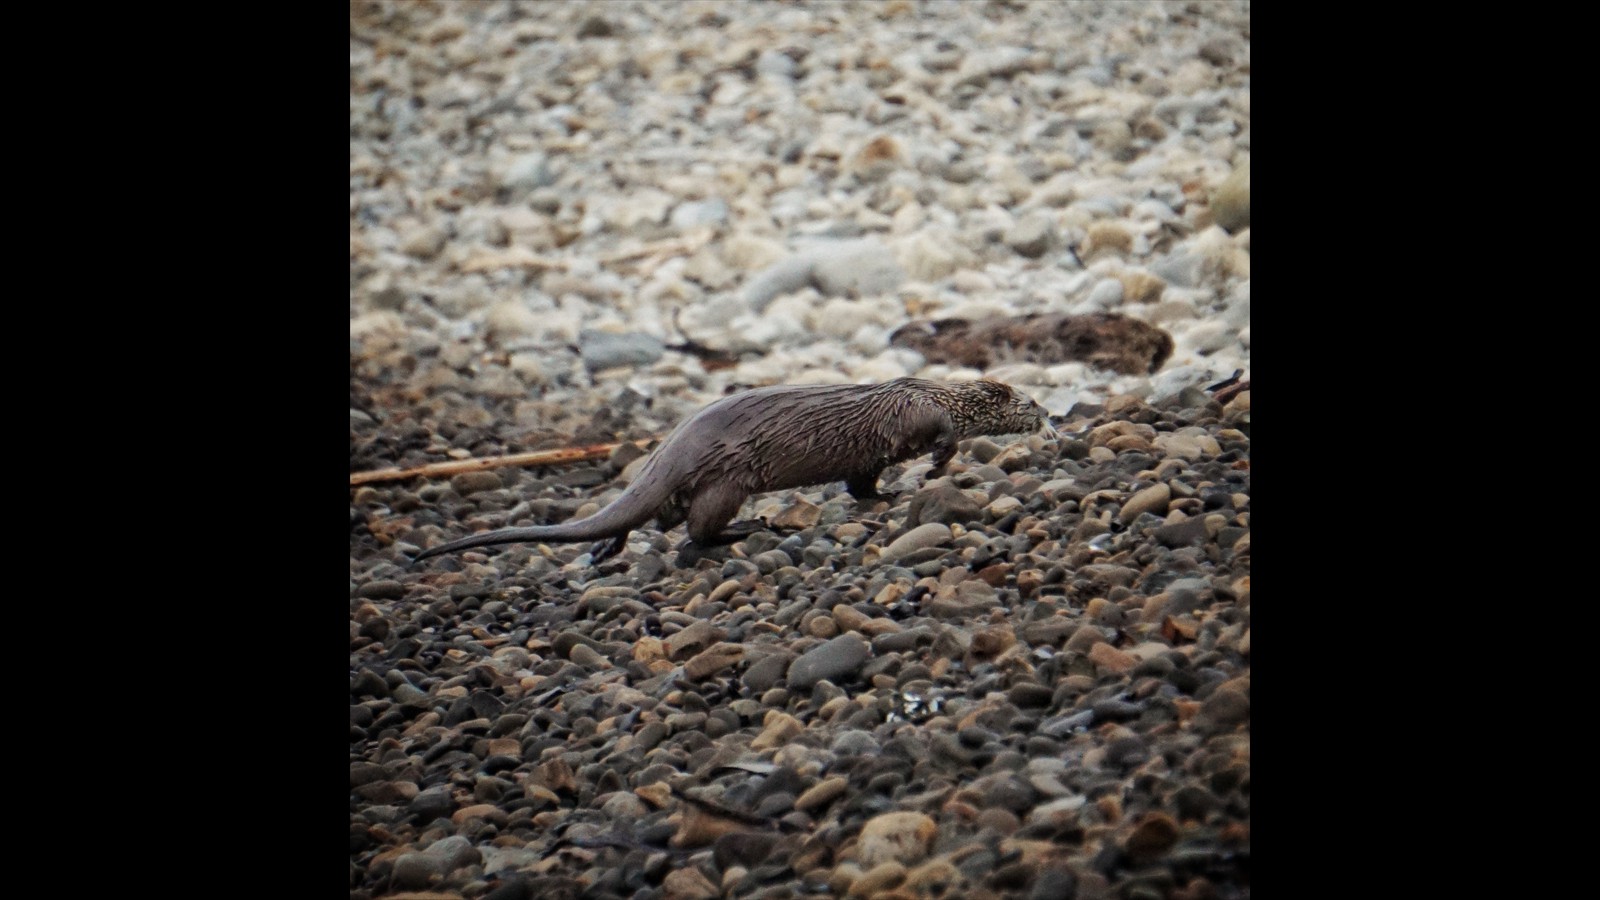 River Otter on the beach at the Point Arena Pier by Brenna Dix